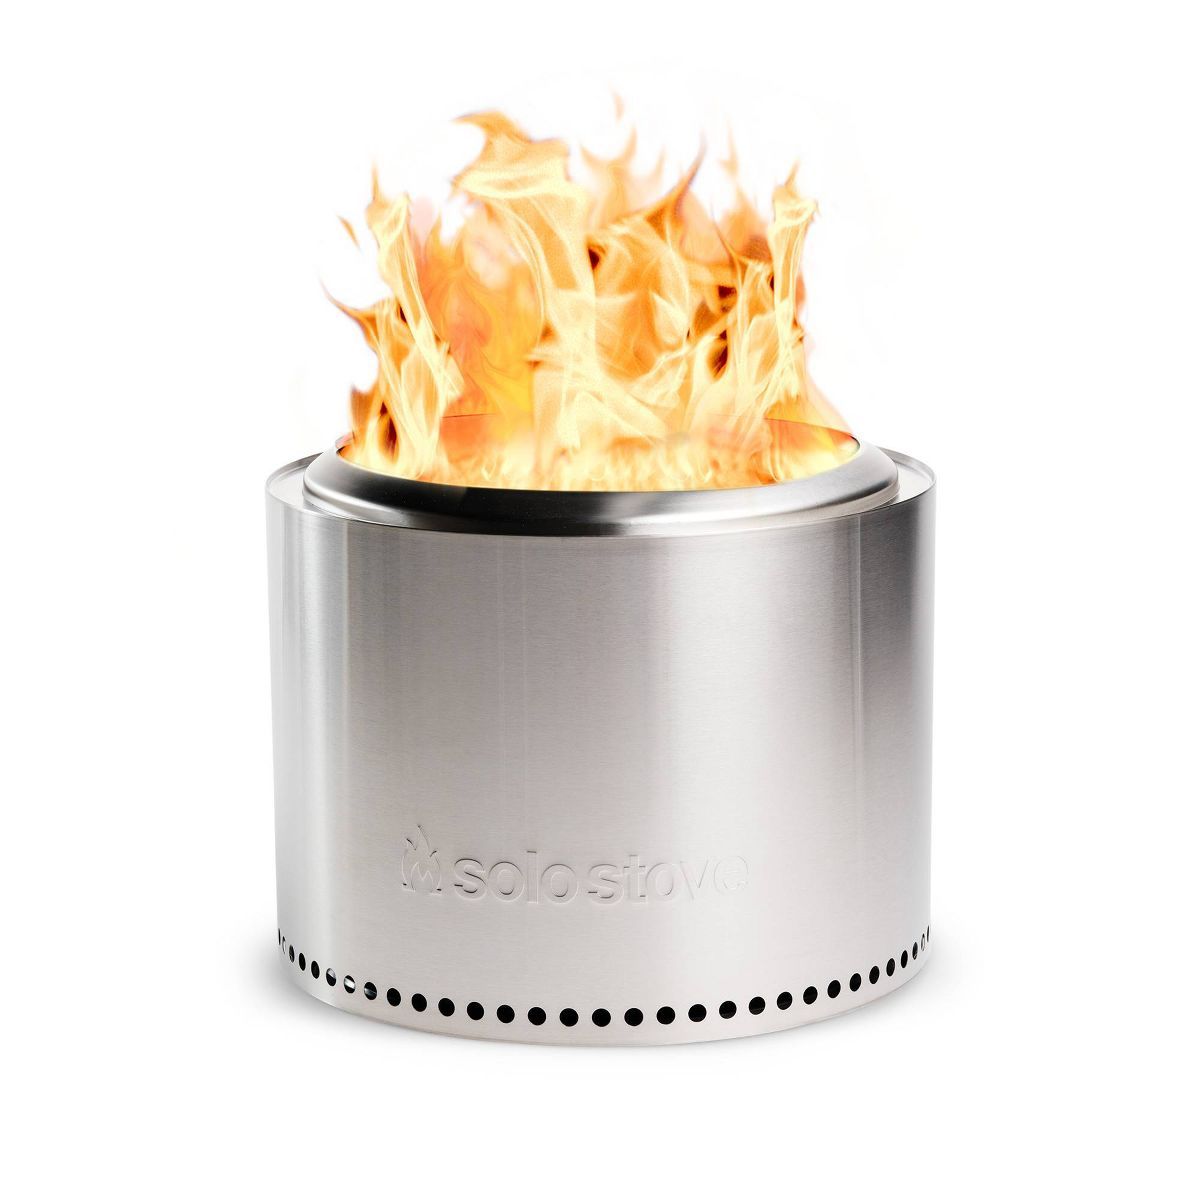 Solo Stove Bonfire 2.0 Outdoor Fire Pit Stainless Steel | Target